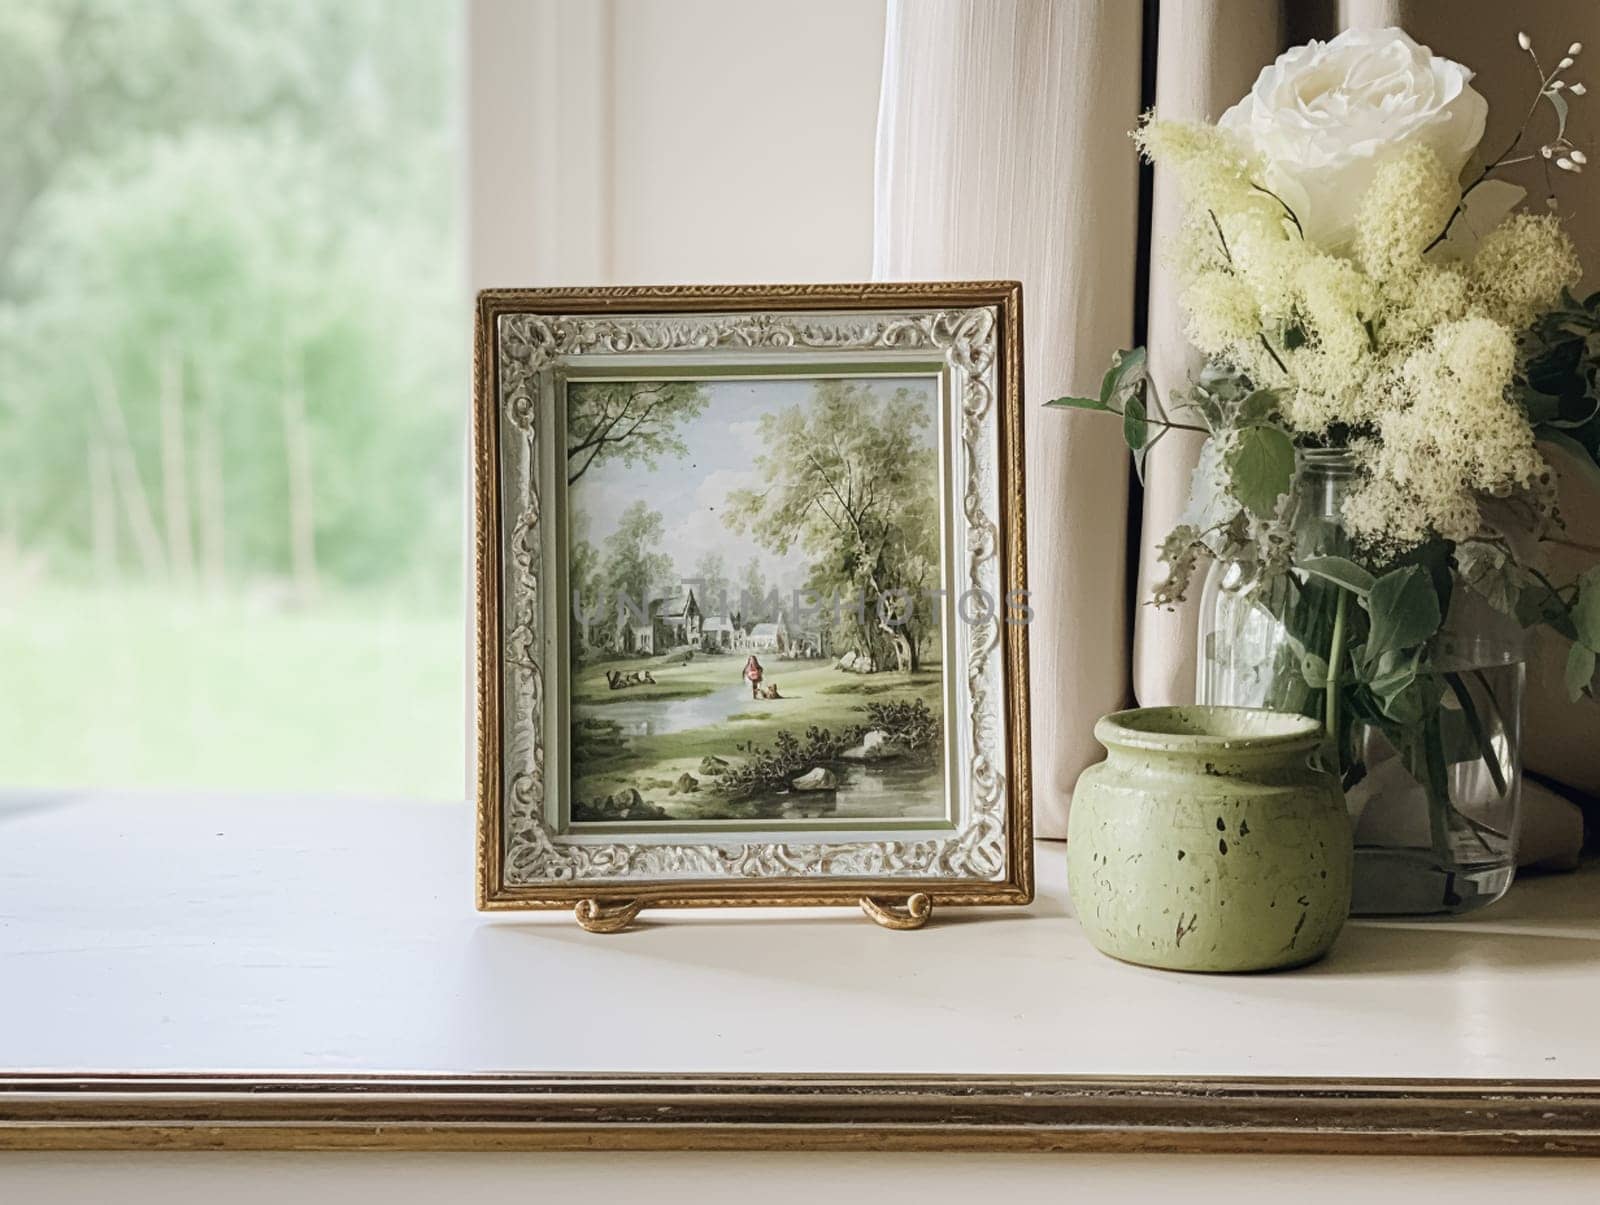 Vintage art frame in the elegant interior, wall and home decor by Anneleven